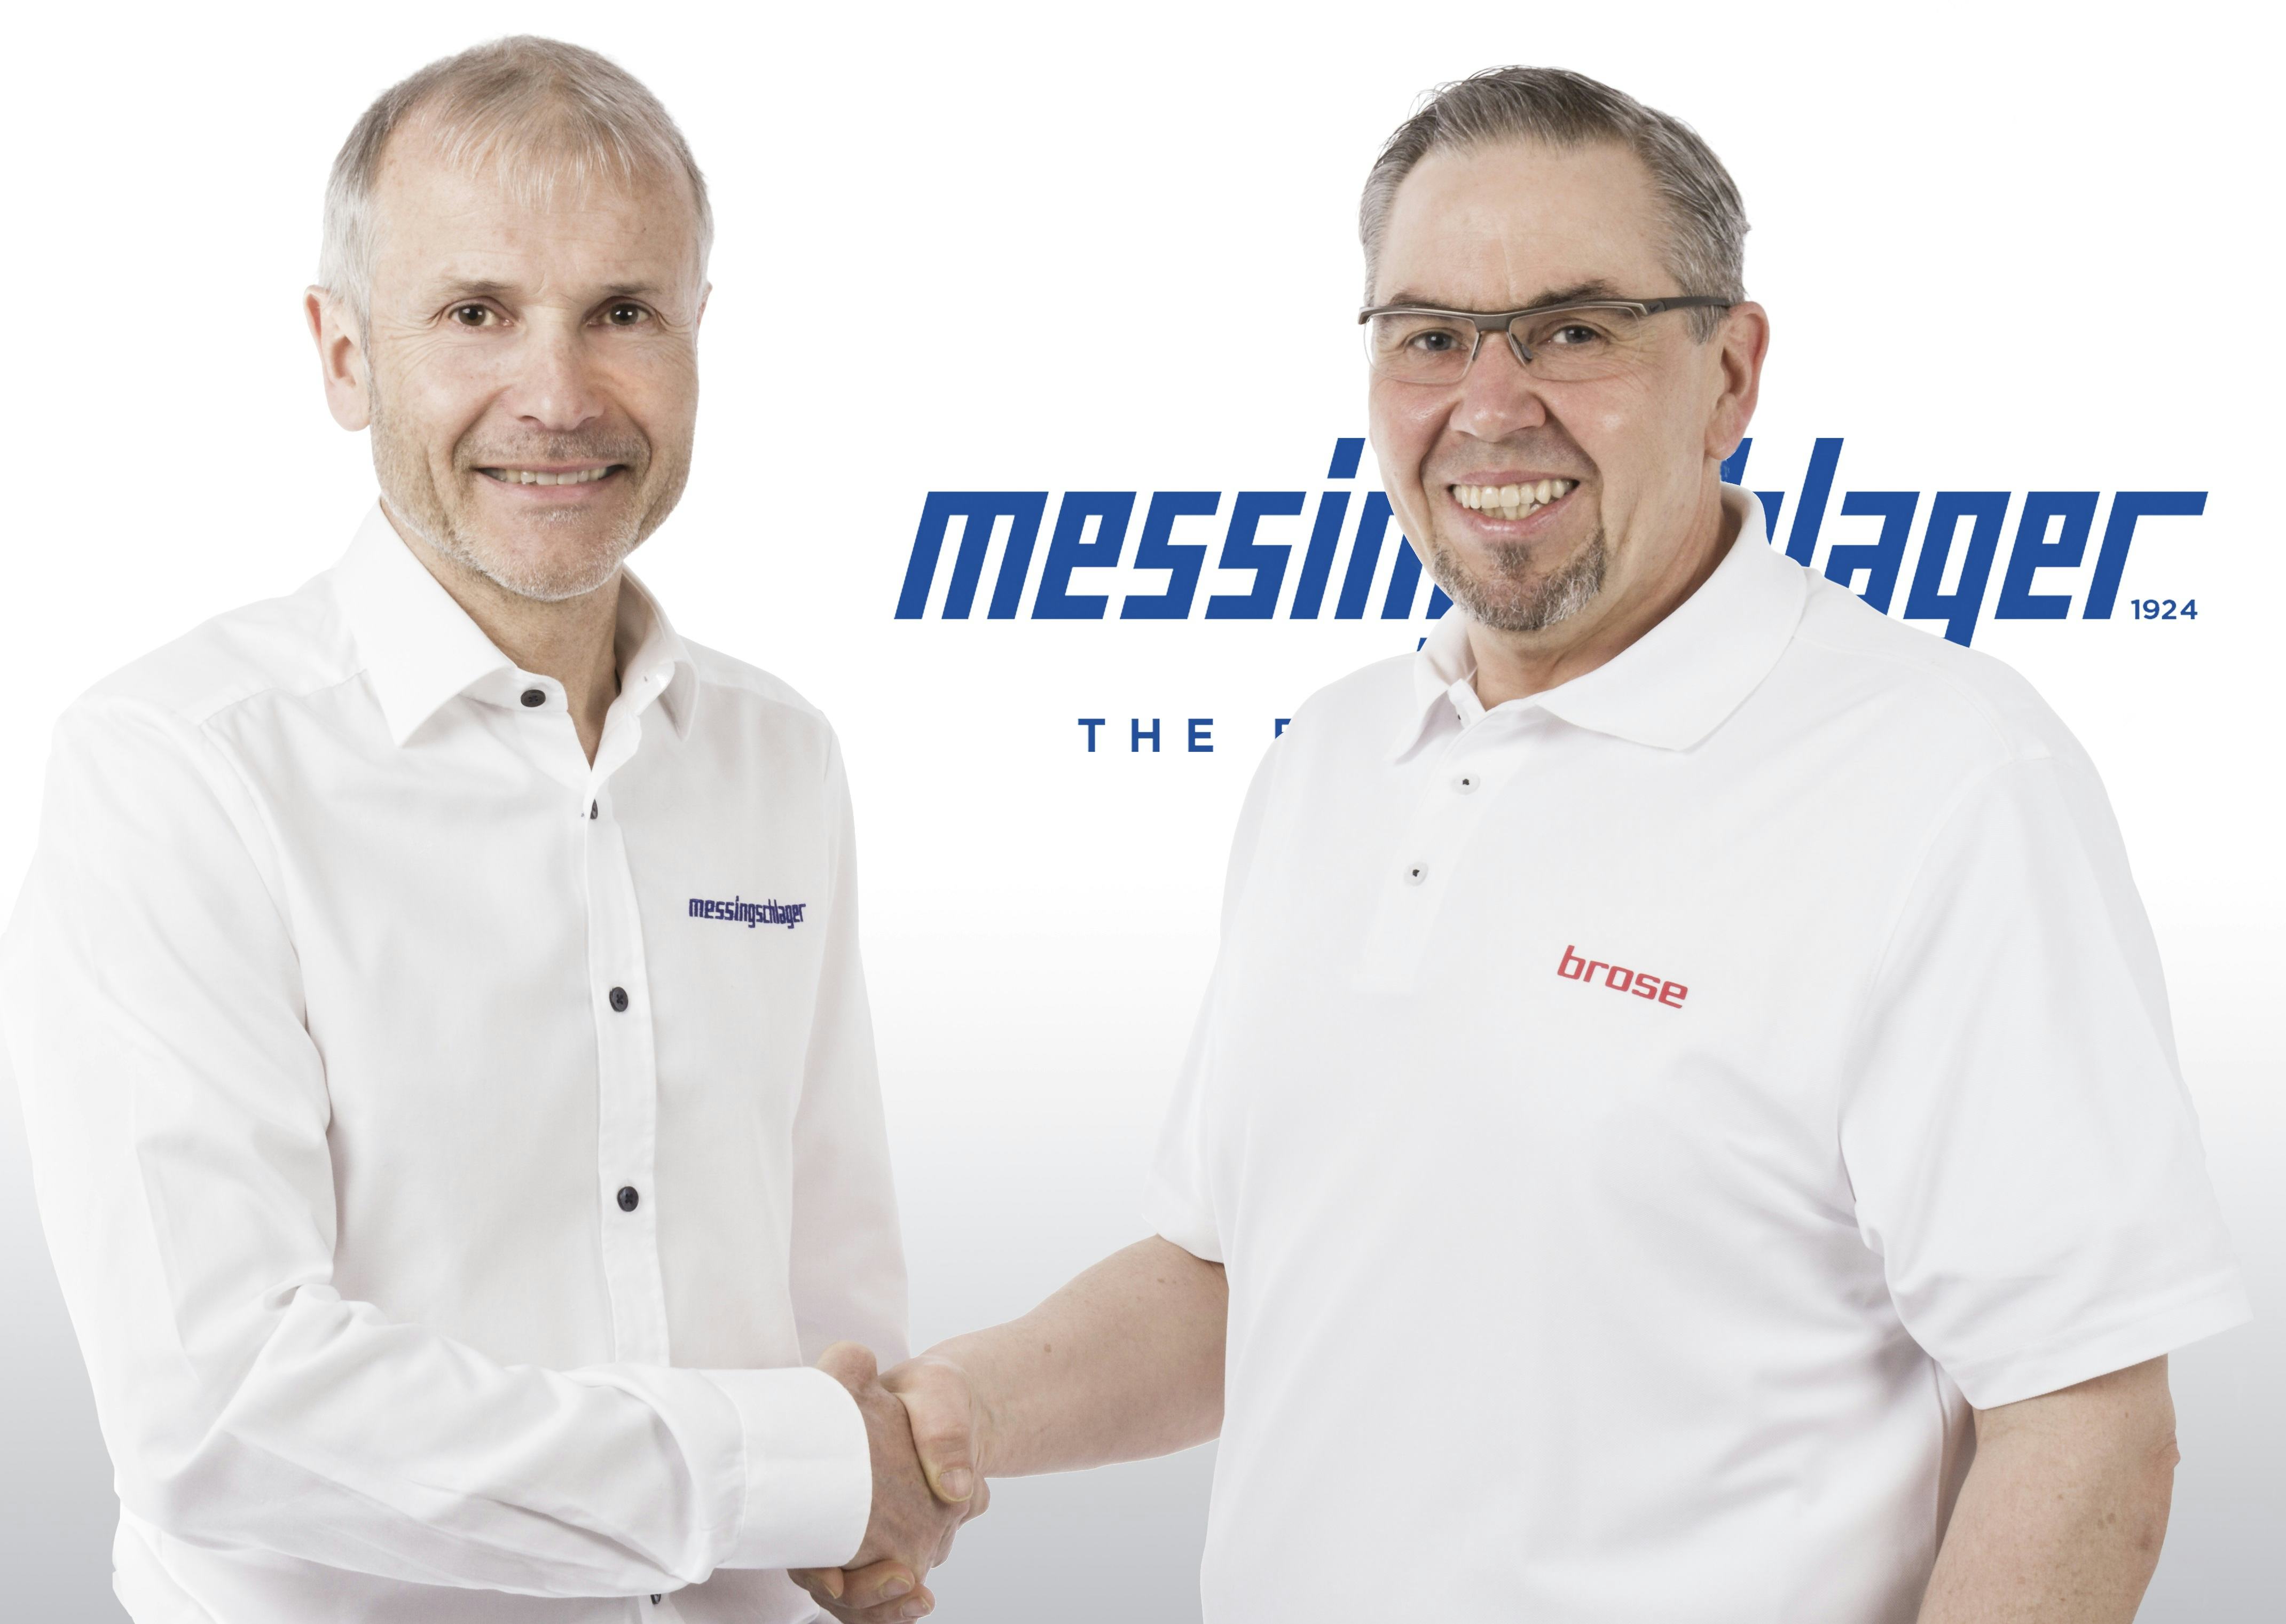 Messingschlager owner Benno Messingschlager (left) and Horst Schuster, Head of Sales and Marketing at Brose Antriebstechnik. – Photo Messingschlager